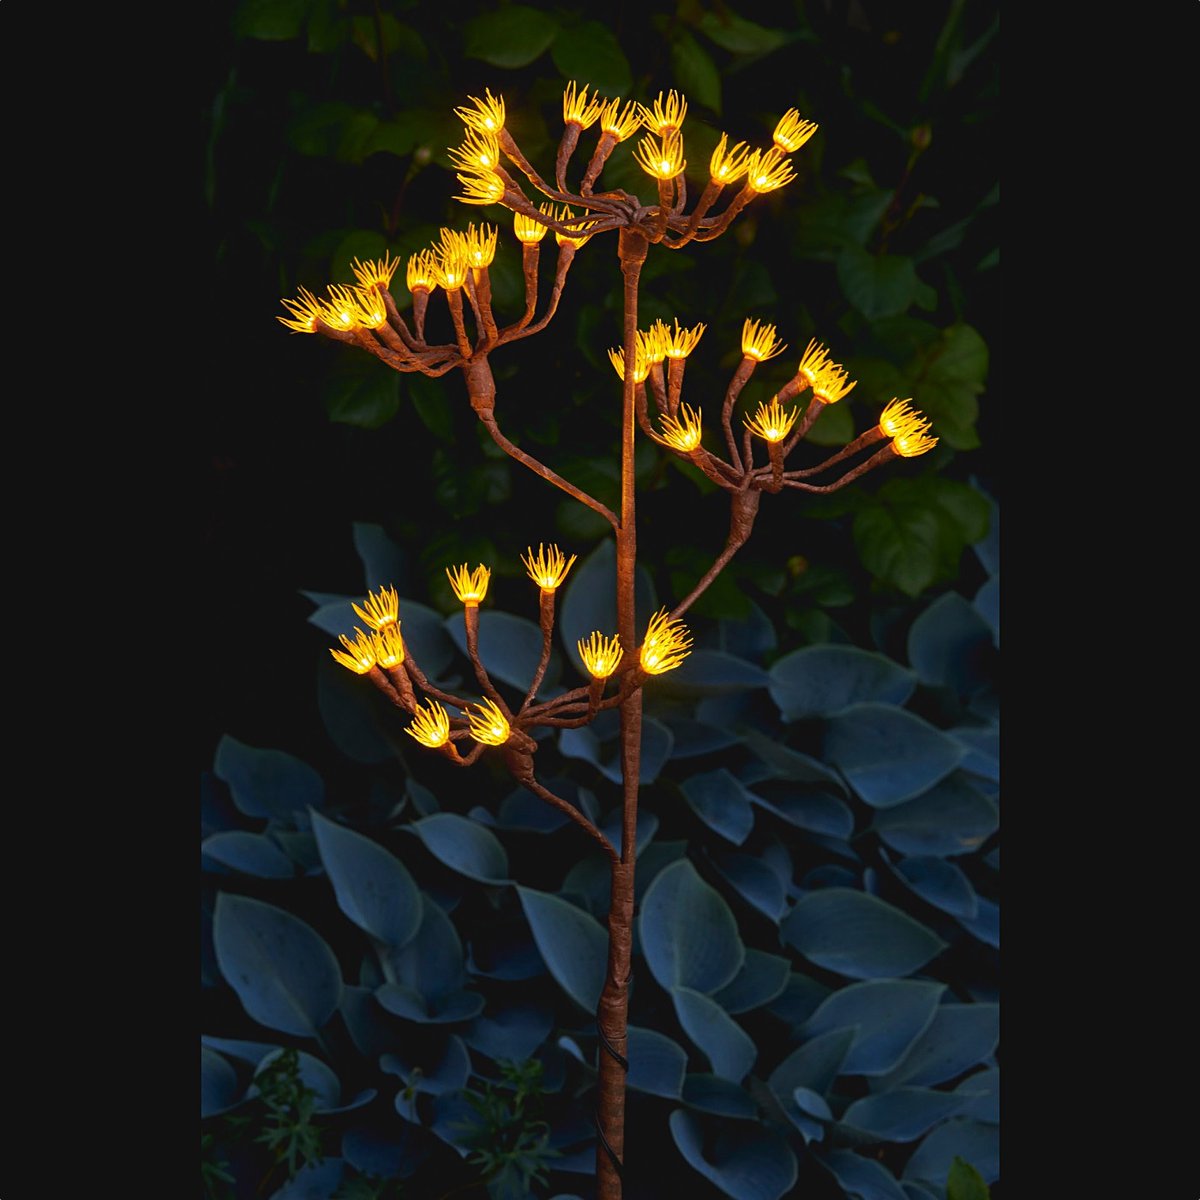 This Wild Fennel Branch is powered by either battery or solar -- making it perfect as an indoor or outdoor light decoration:
👉 ooothatsnice.co.uk/solar-wild-fen… ✨

#LightstyleLondon #WildFennelBranch #DecorativeLights #SolarLights #GiftIdeas #OooThatsNice